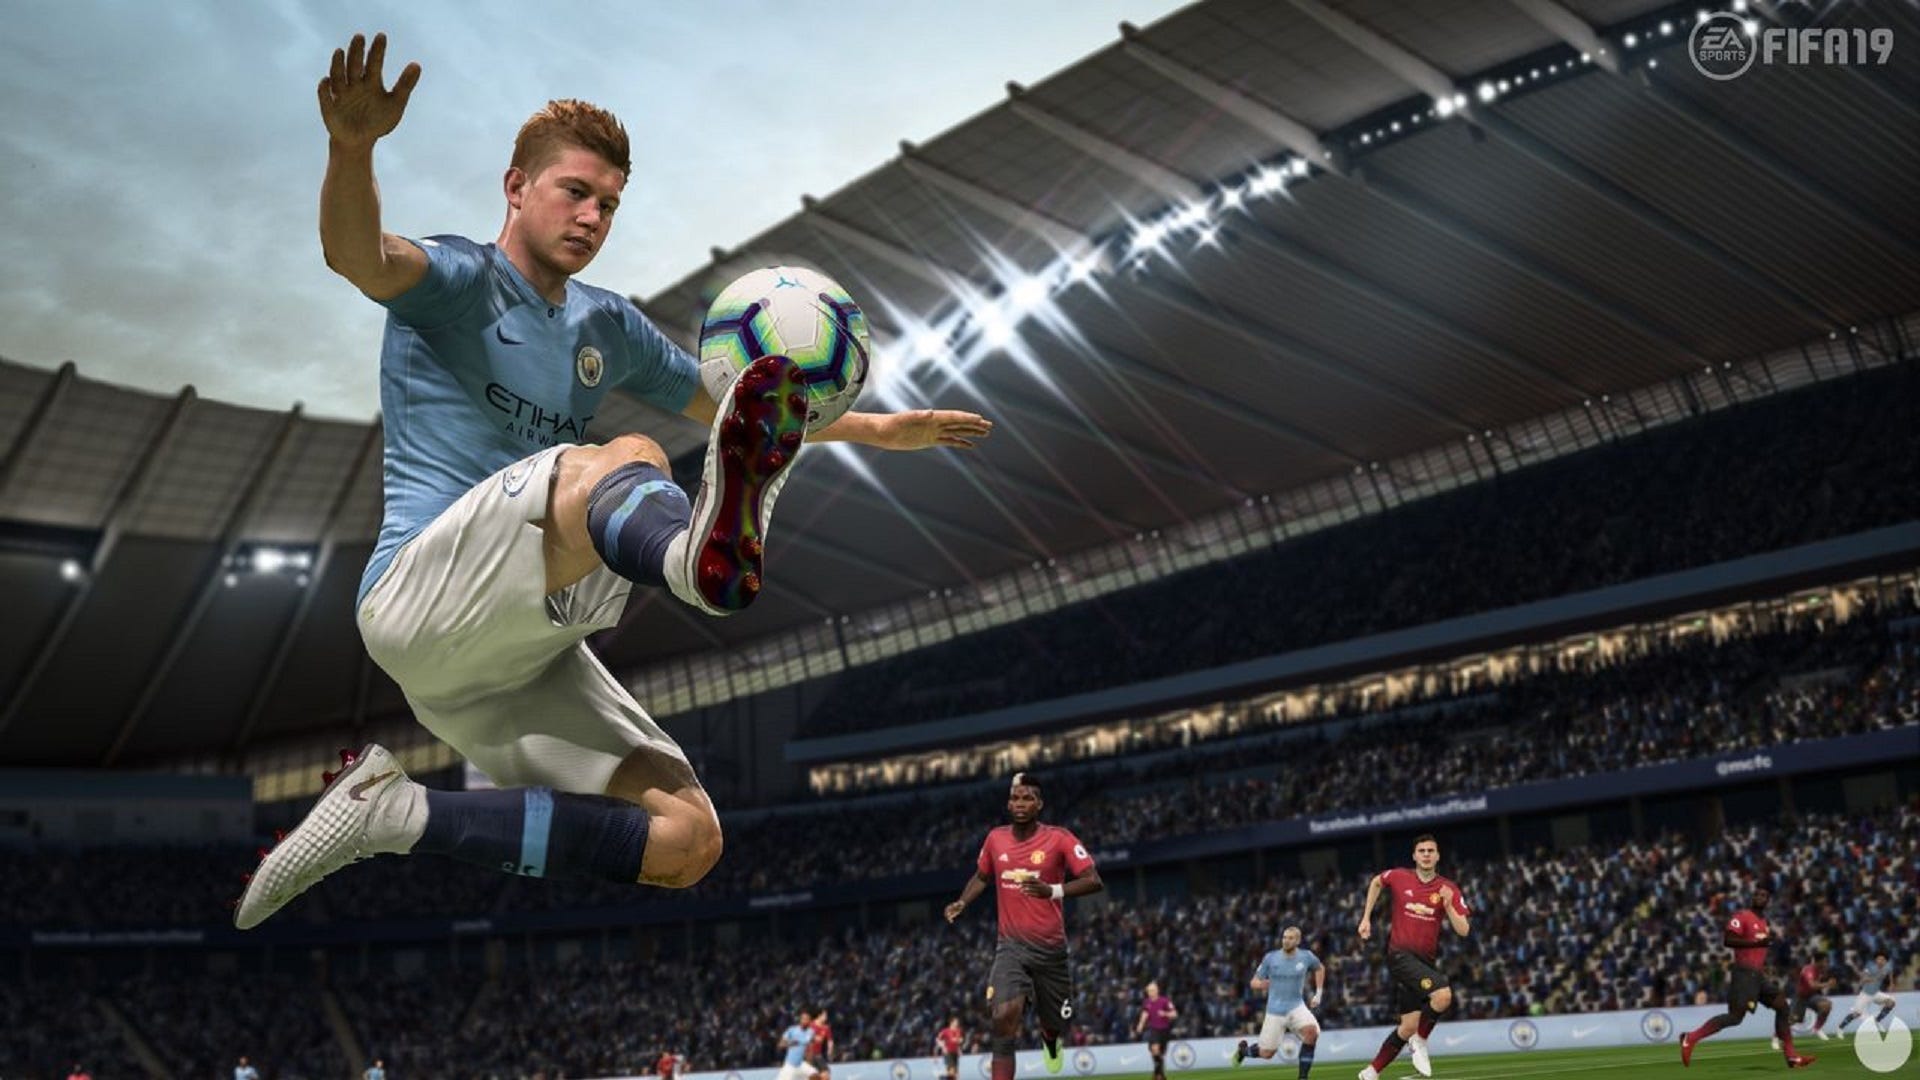 FIFA 19: What gameplay improvements and changes are in the new